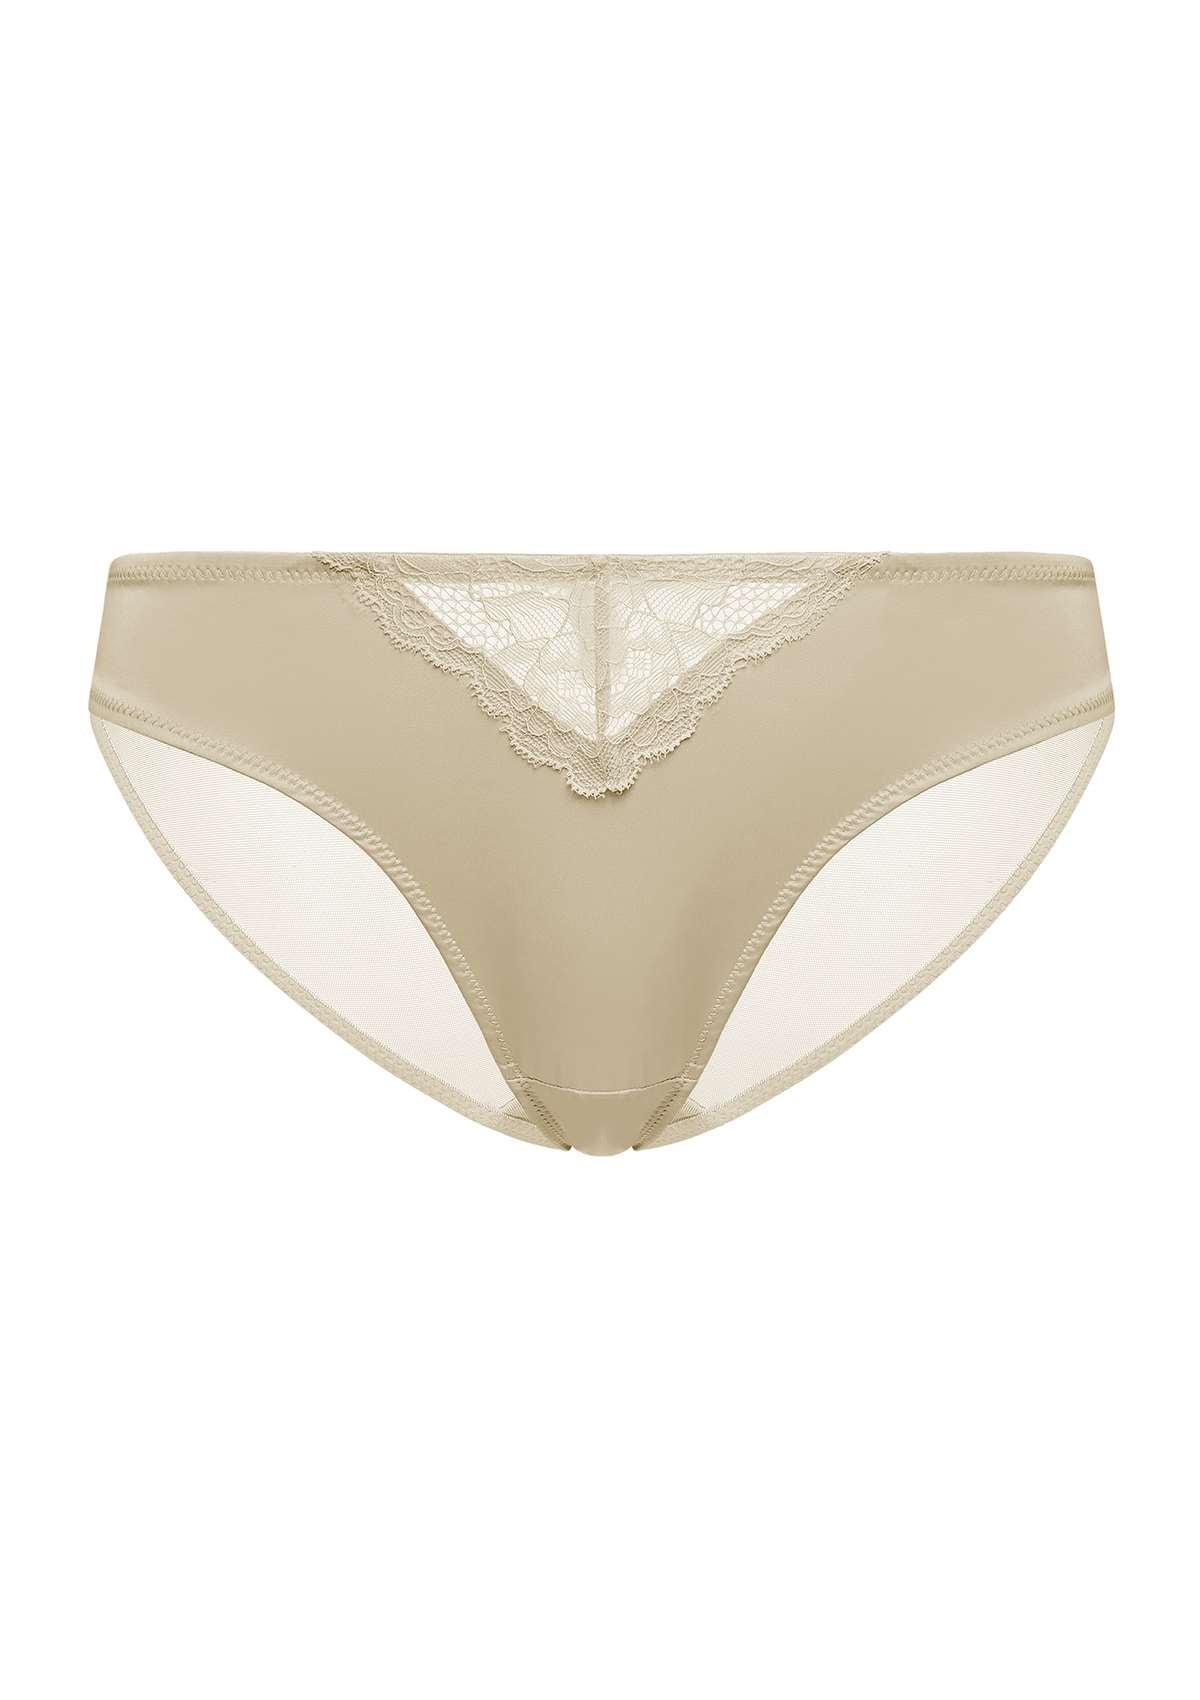 HSIA Foxy Satin Floral Lace Airy Comfy Low Rise Sexy Cute Underwear. - S / Champagne